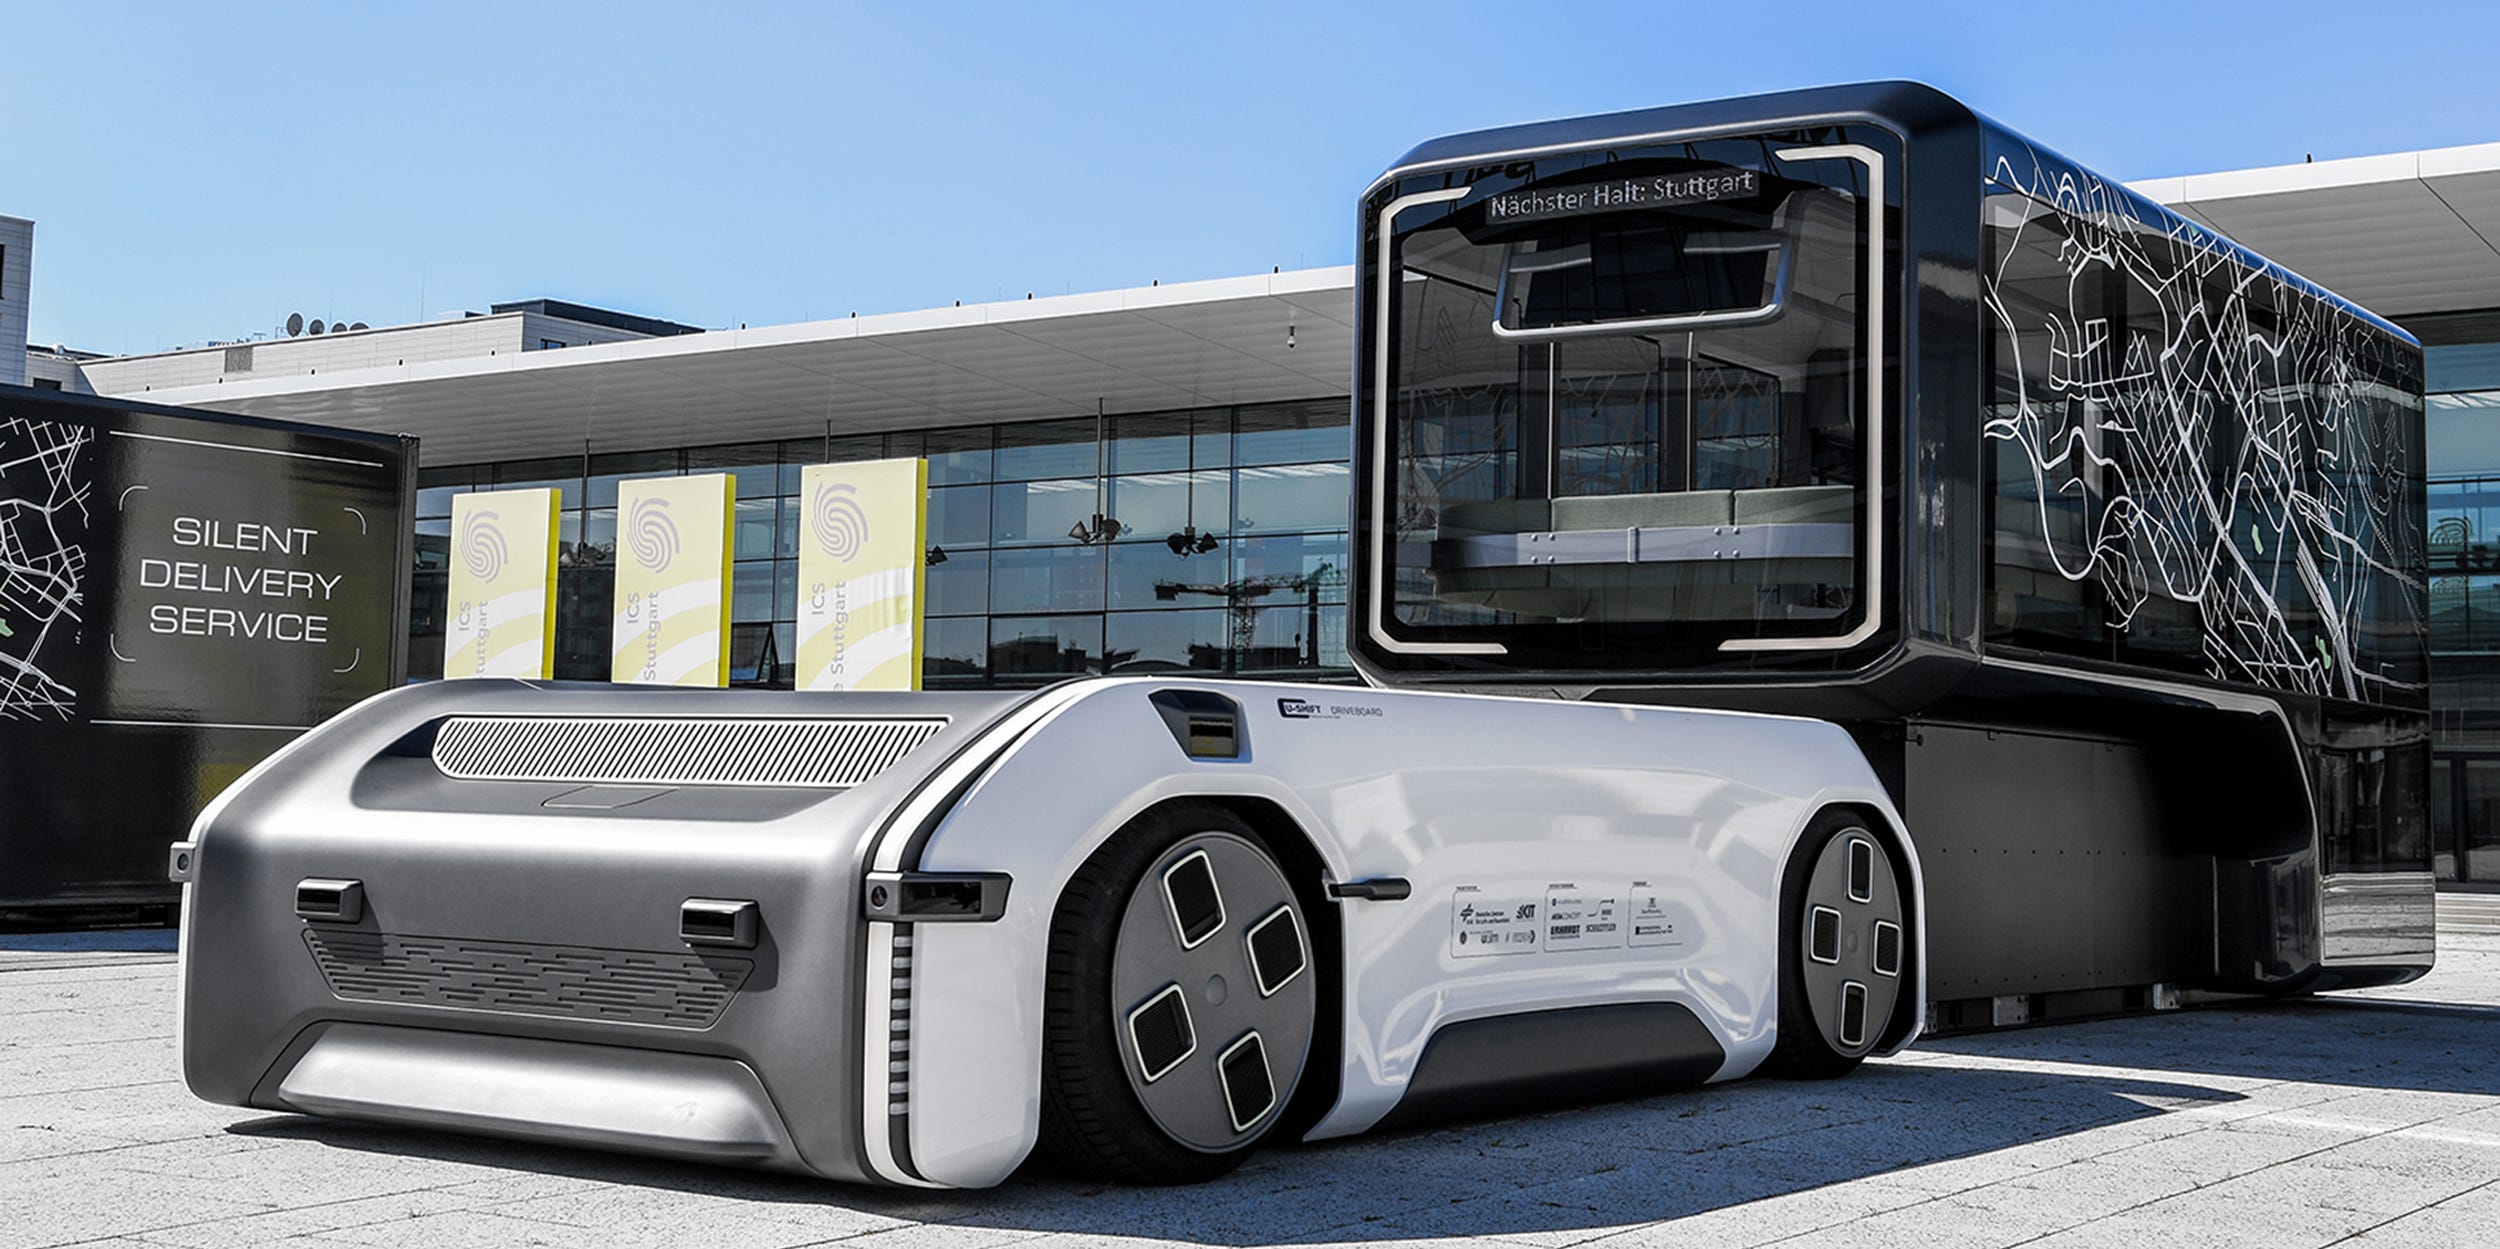 Germany’s aerospace center has unveiled a concept modular electric vehicle that can change from a bus to a cargo van